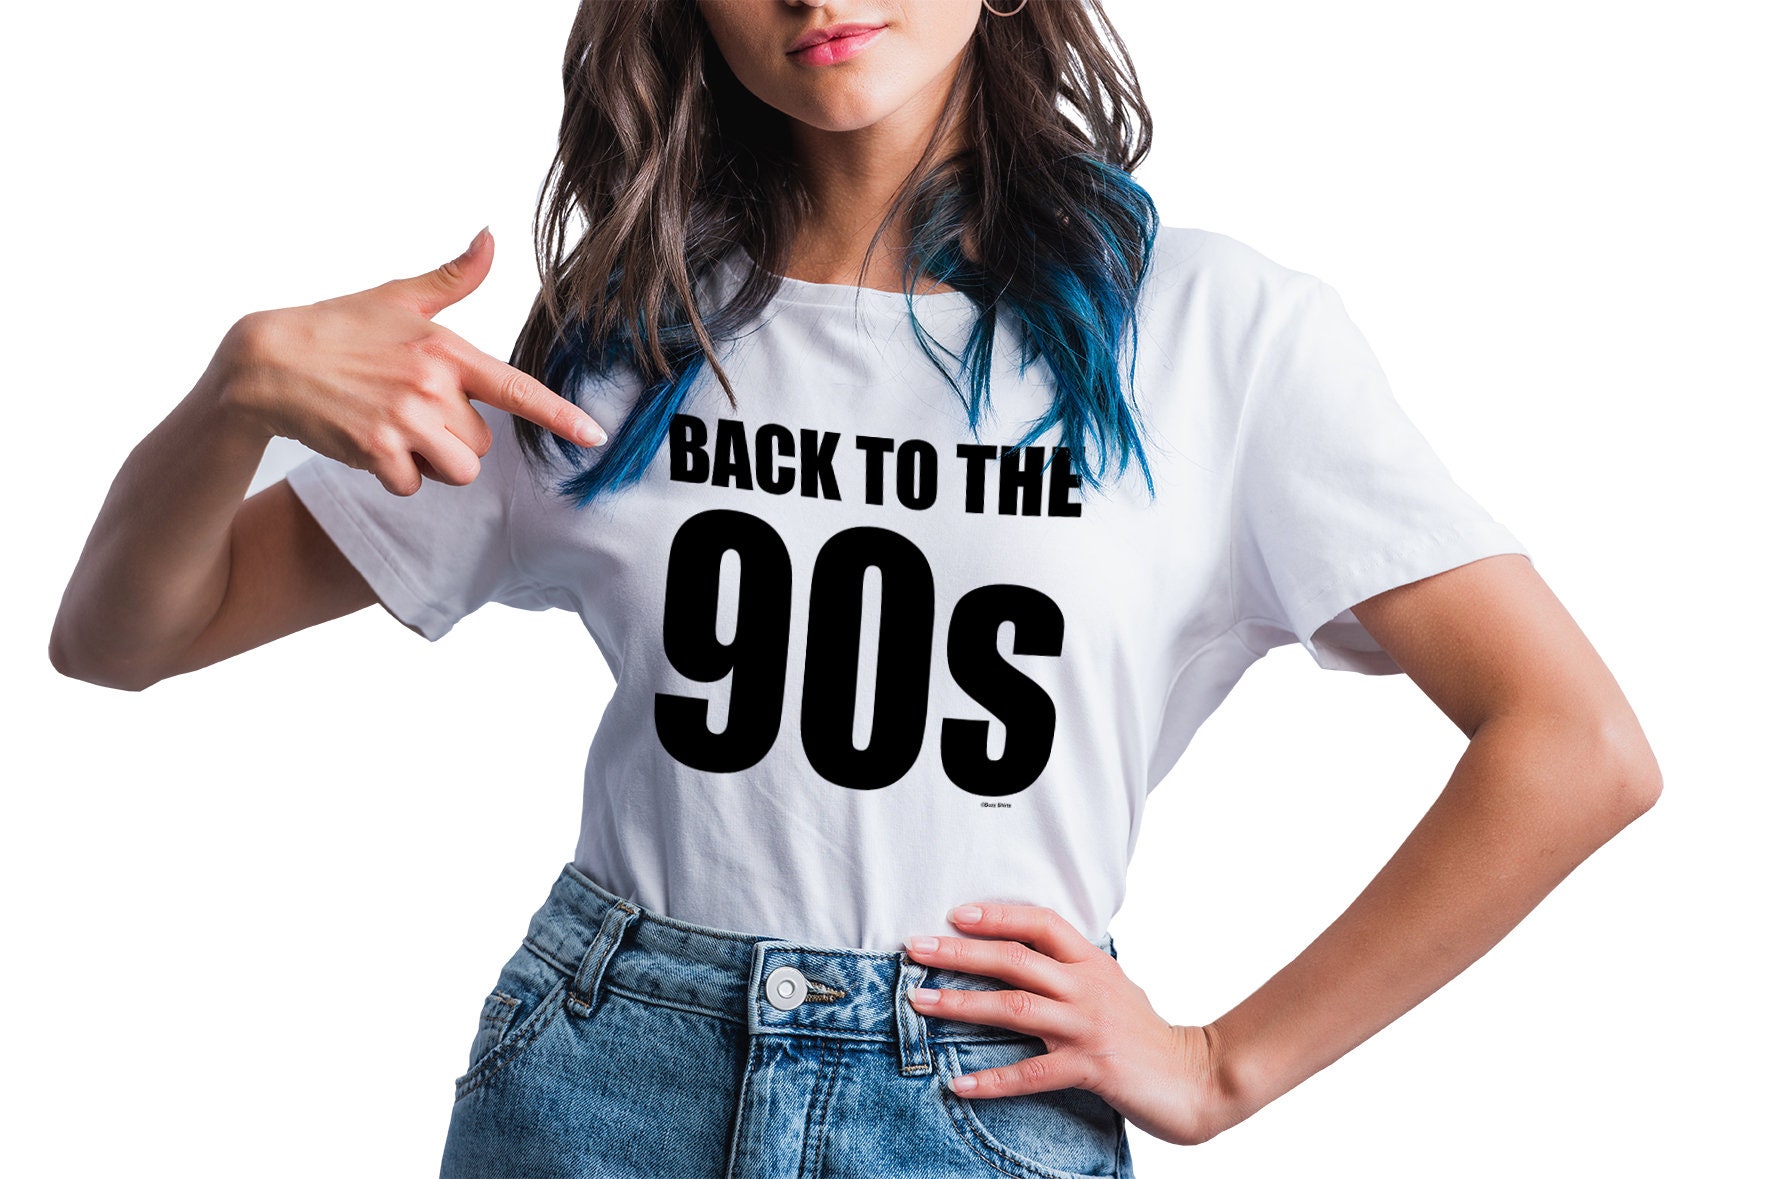 Women are back. Футболка back to 90. Футболка the Doors. Zolla футболка back to the 90's. Футболка Ninety-eight.